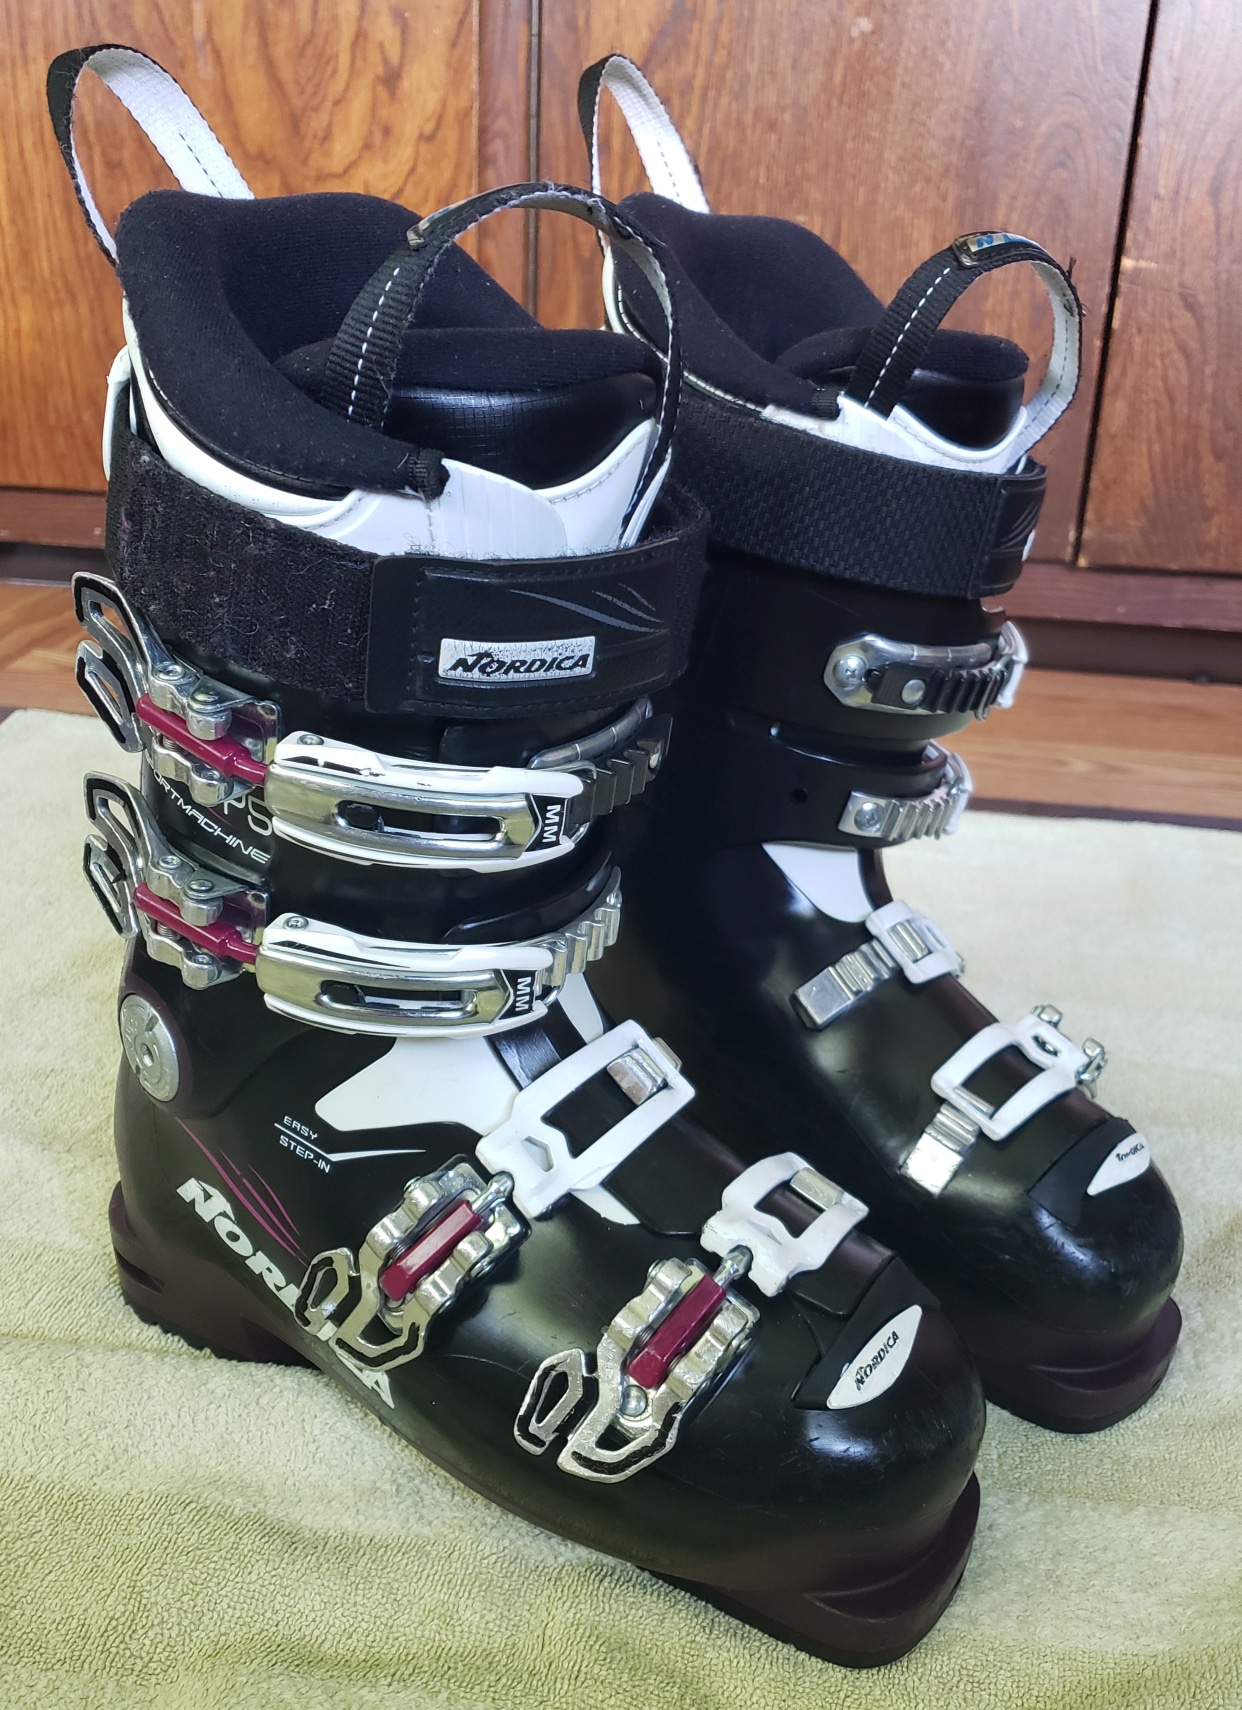 WOMENS 7 SKI BOOTS NORDICA SPORT MACHINE 75 ADULT *USED/NEWER STYLE* NEW SOLES* CLEAN 285mm